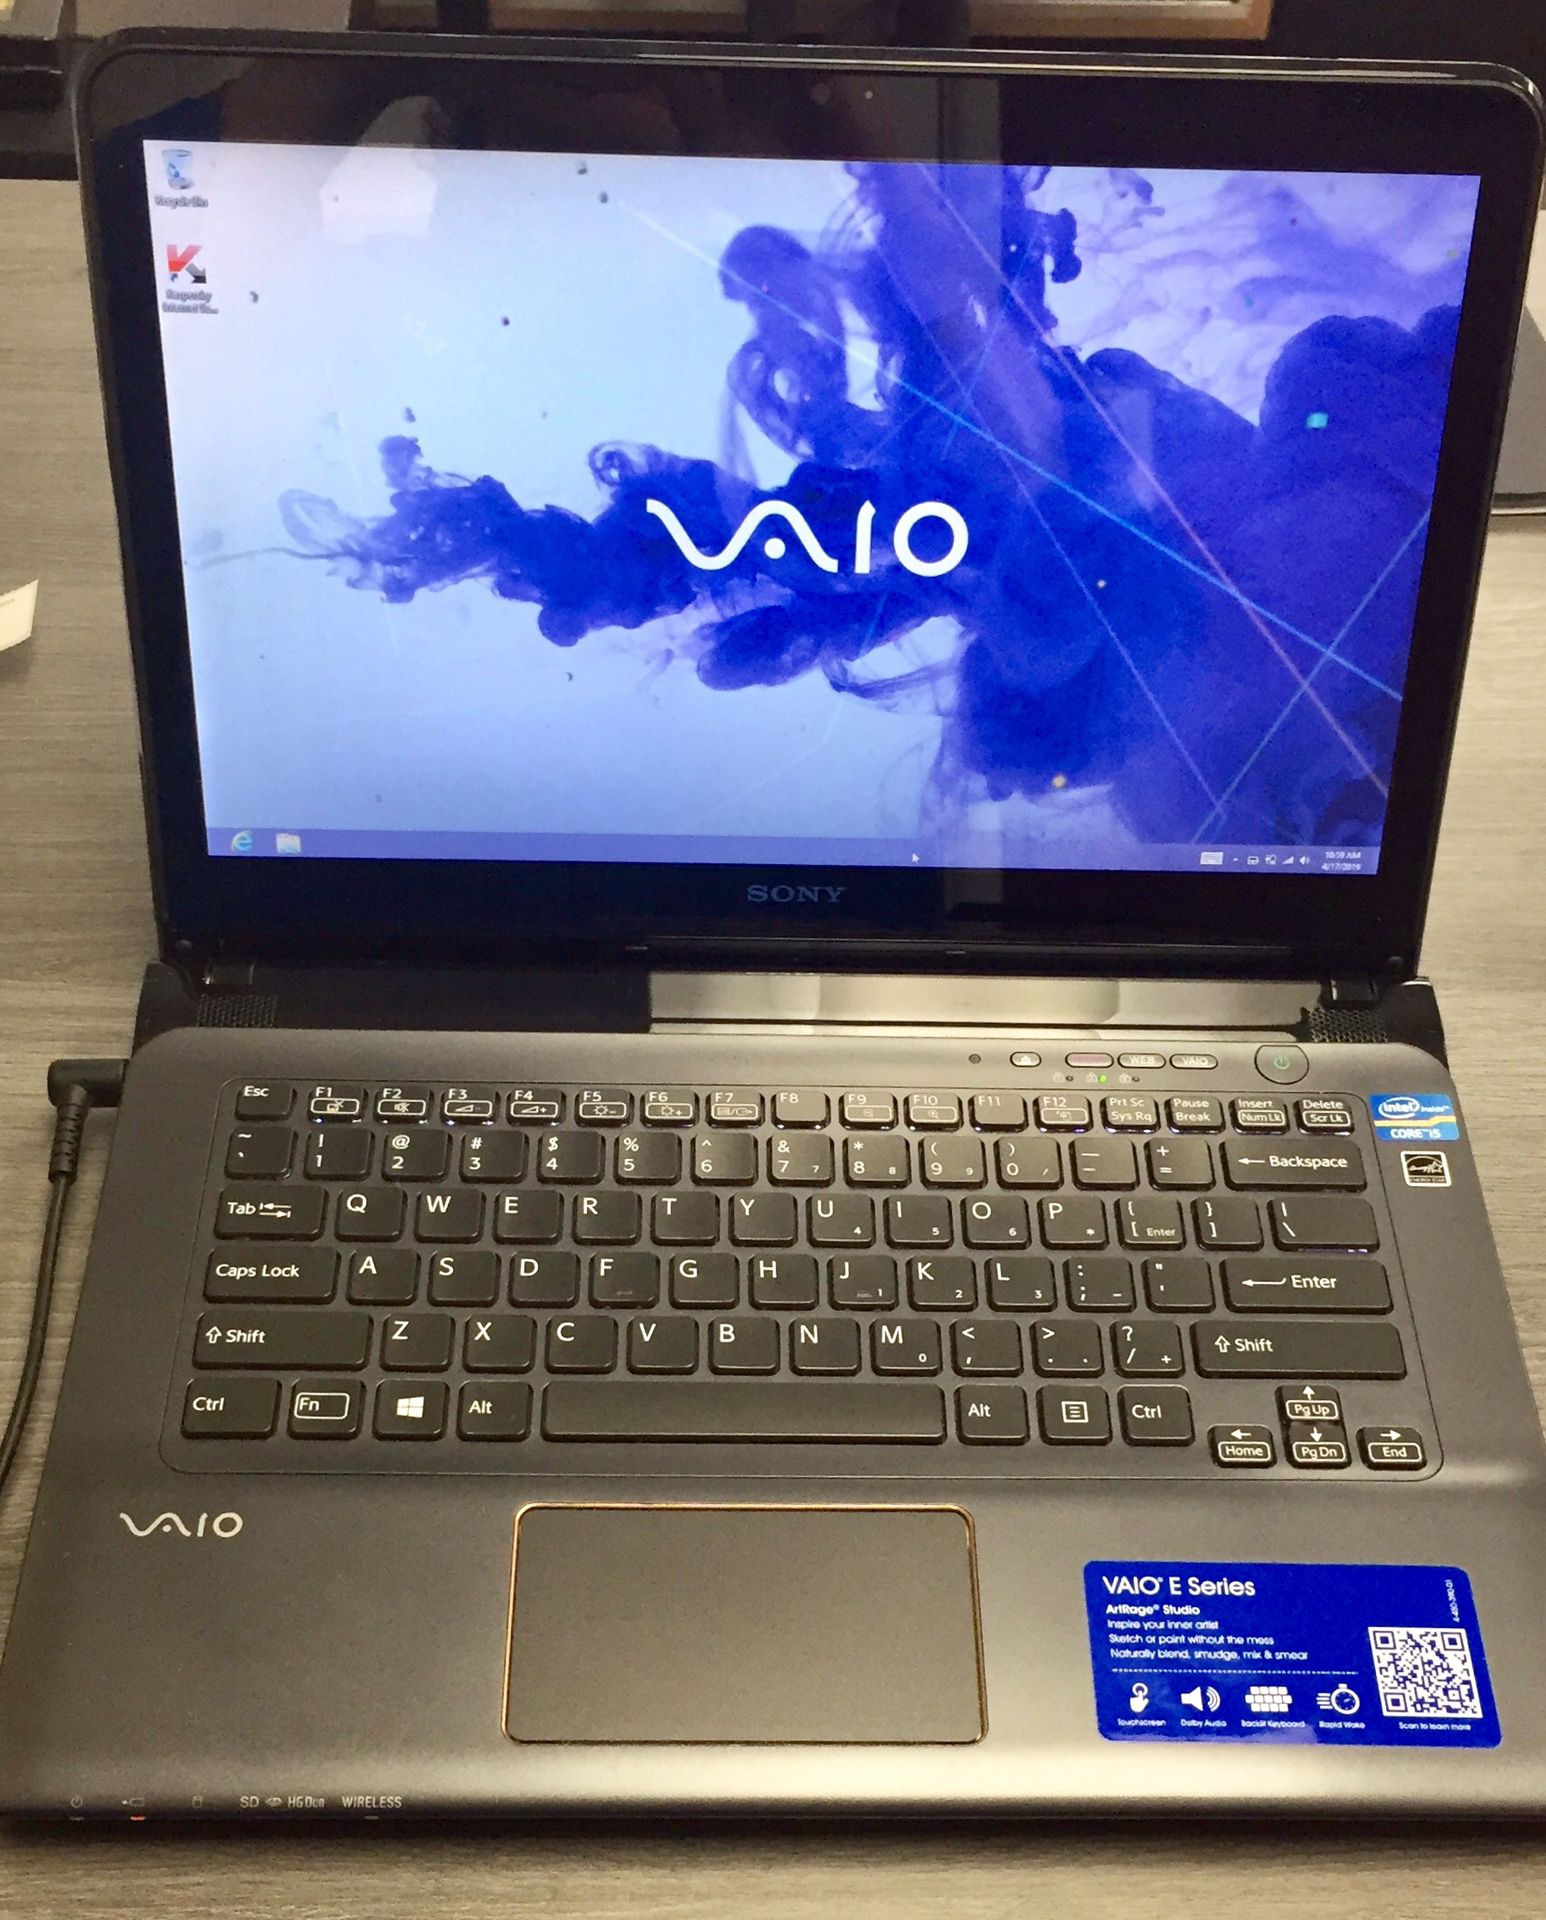 FAST SONY VAIO E-Series SVE14AJ16L 14” Personal Laptop Computer. Factory Restored, Excellent Condition. Intel core i5 Windows 8 OS & Touch Screen.